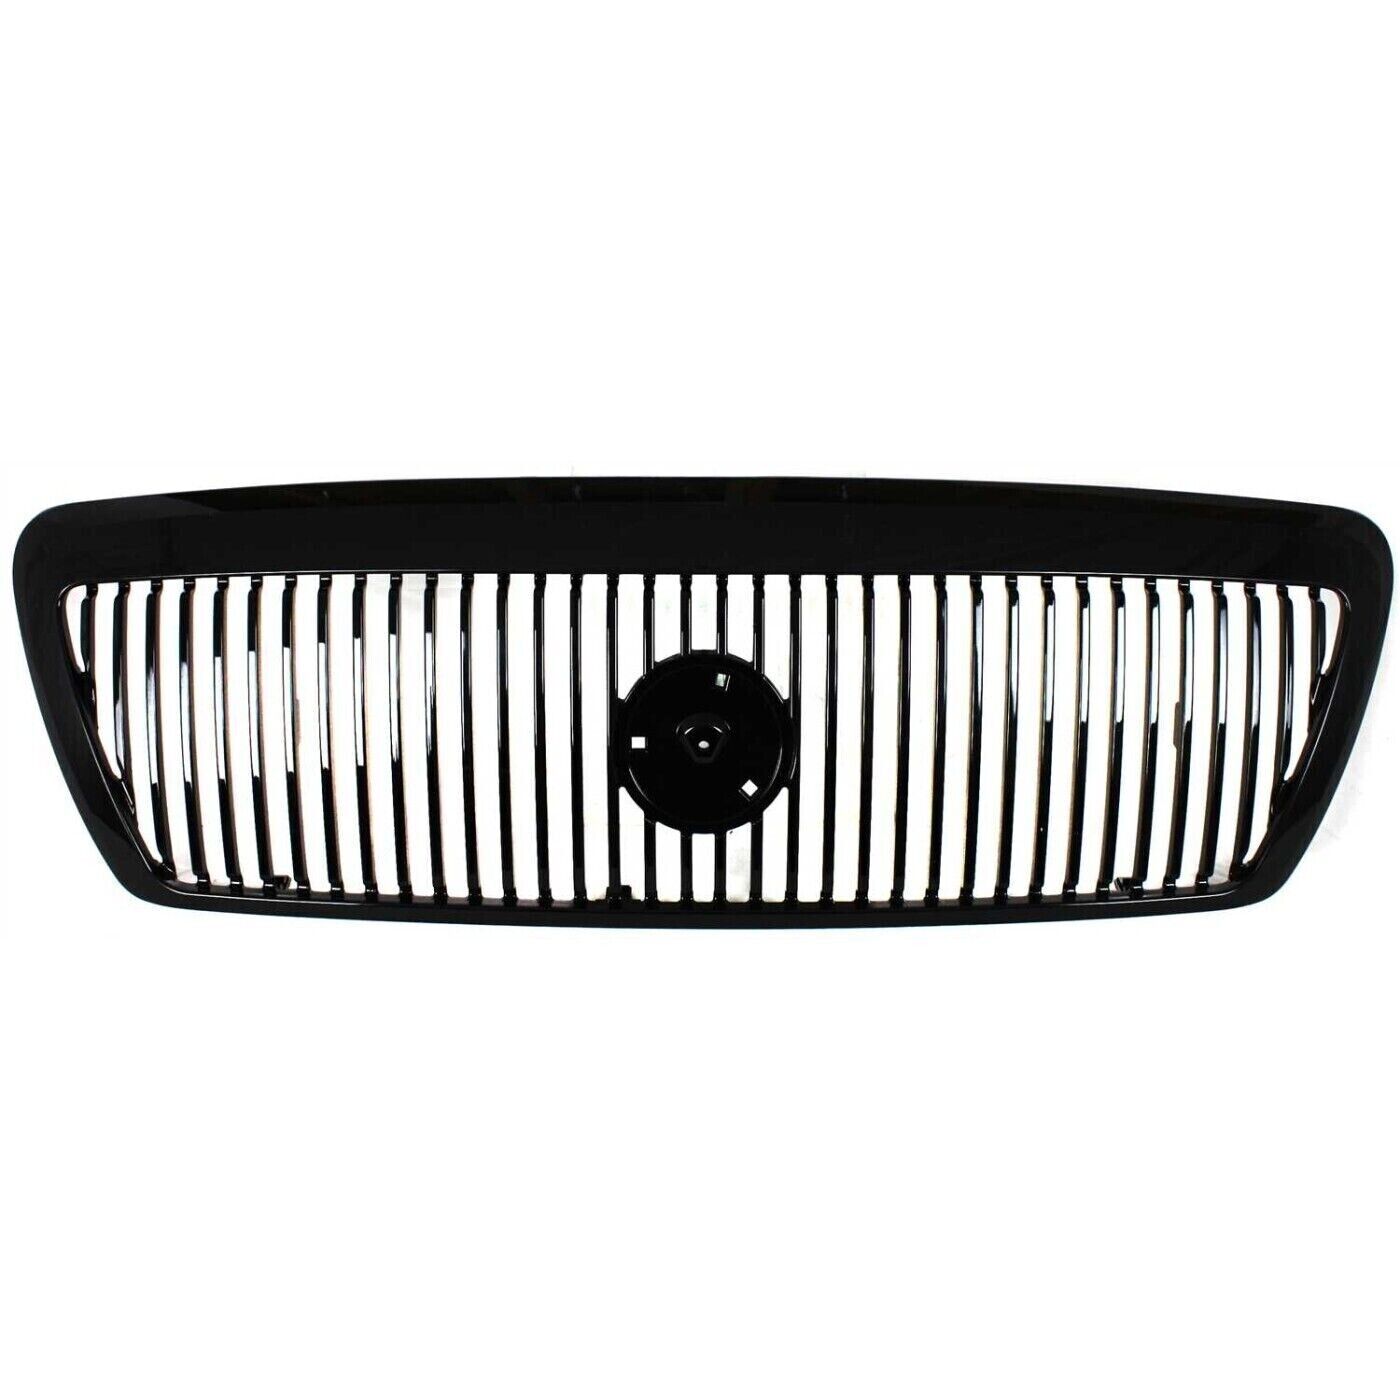 NEW Front Grille For 2003-2004 Mercury Marauder SHIPS TODAY